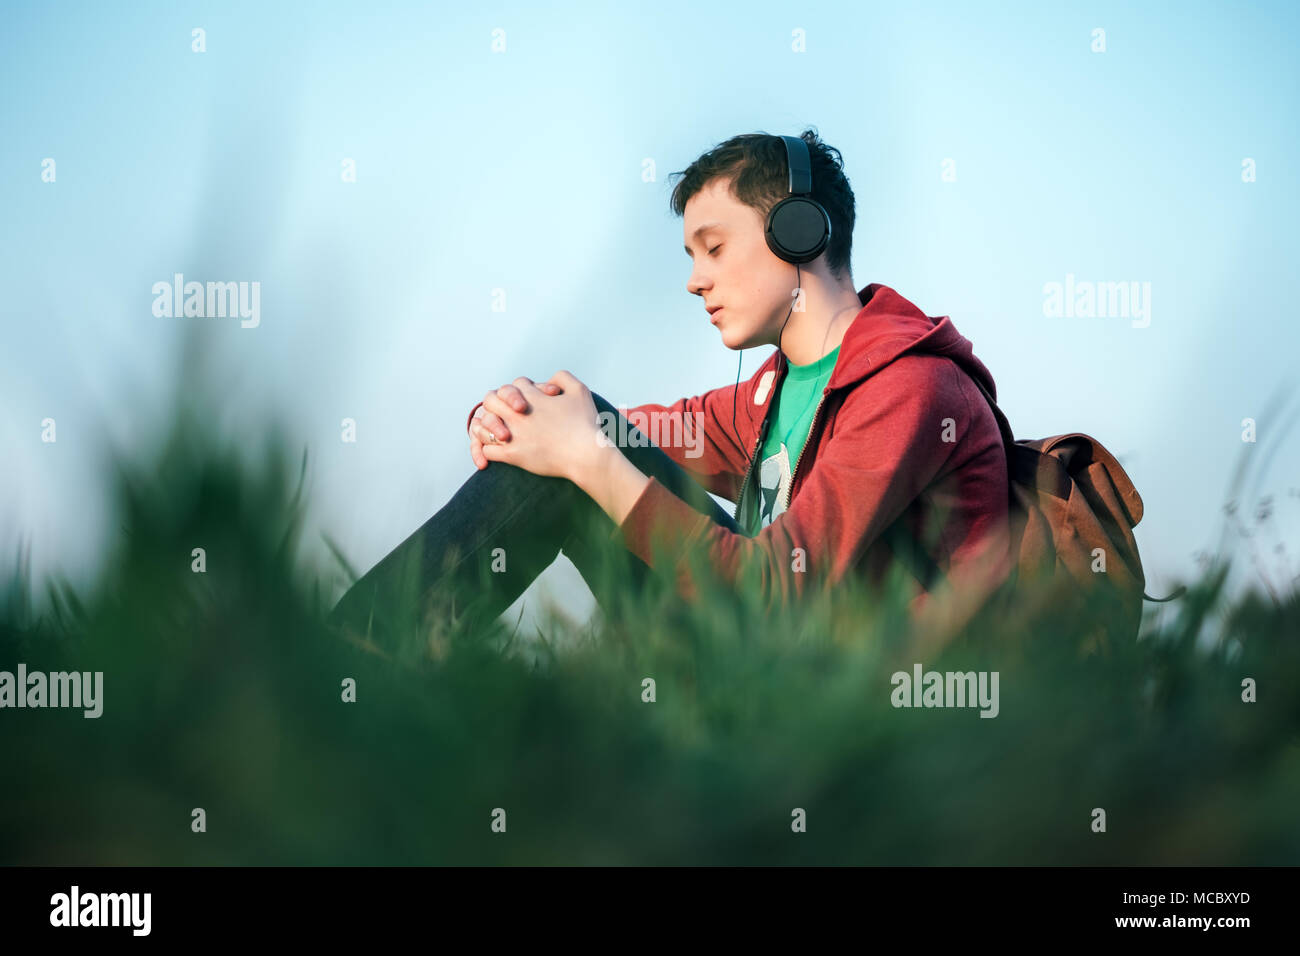 Teenager on green lawn listening music Stock Photo